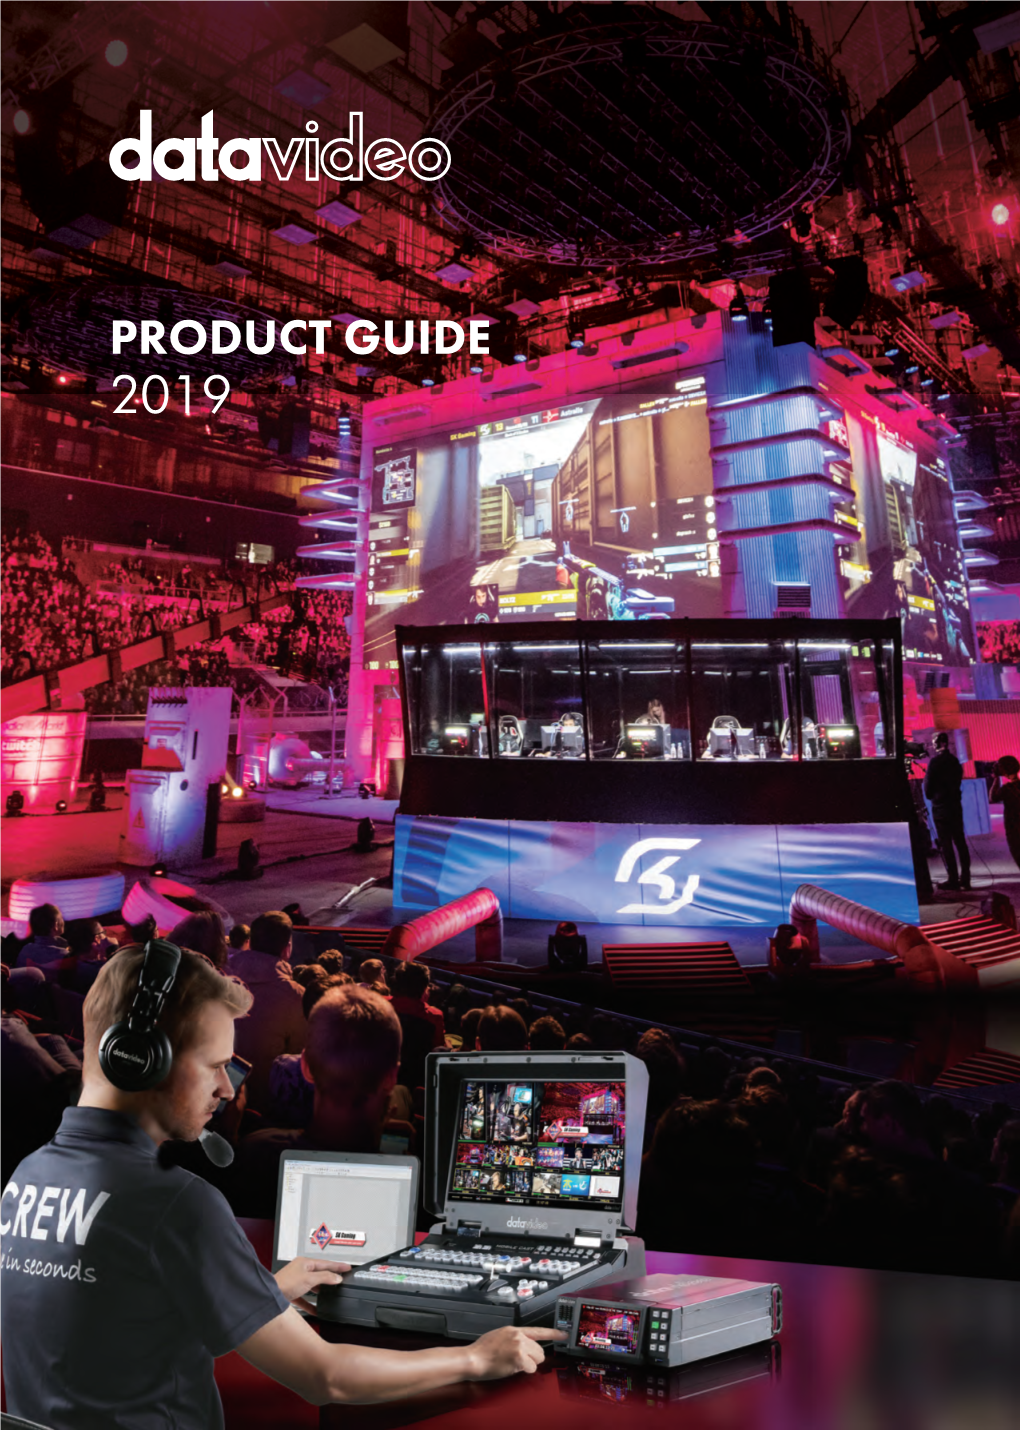 Product Guide 2019 Contents